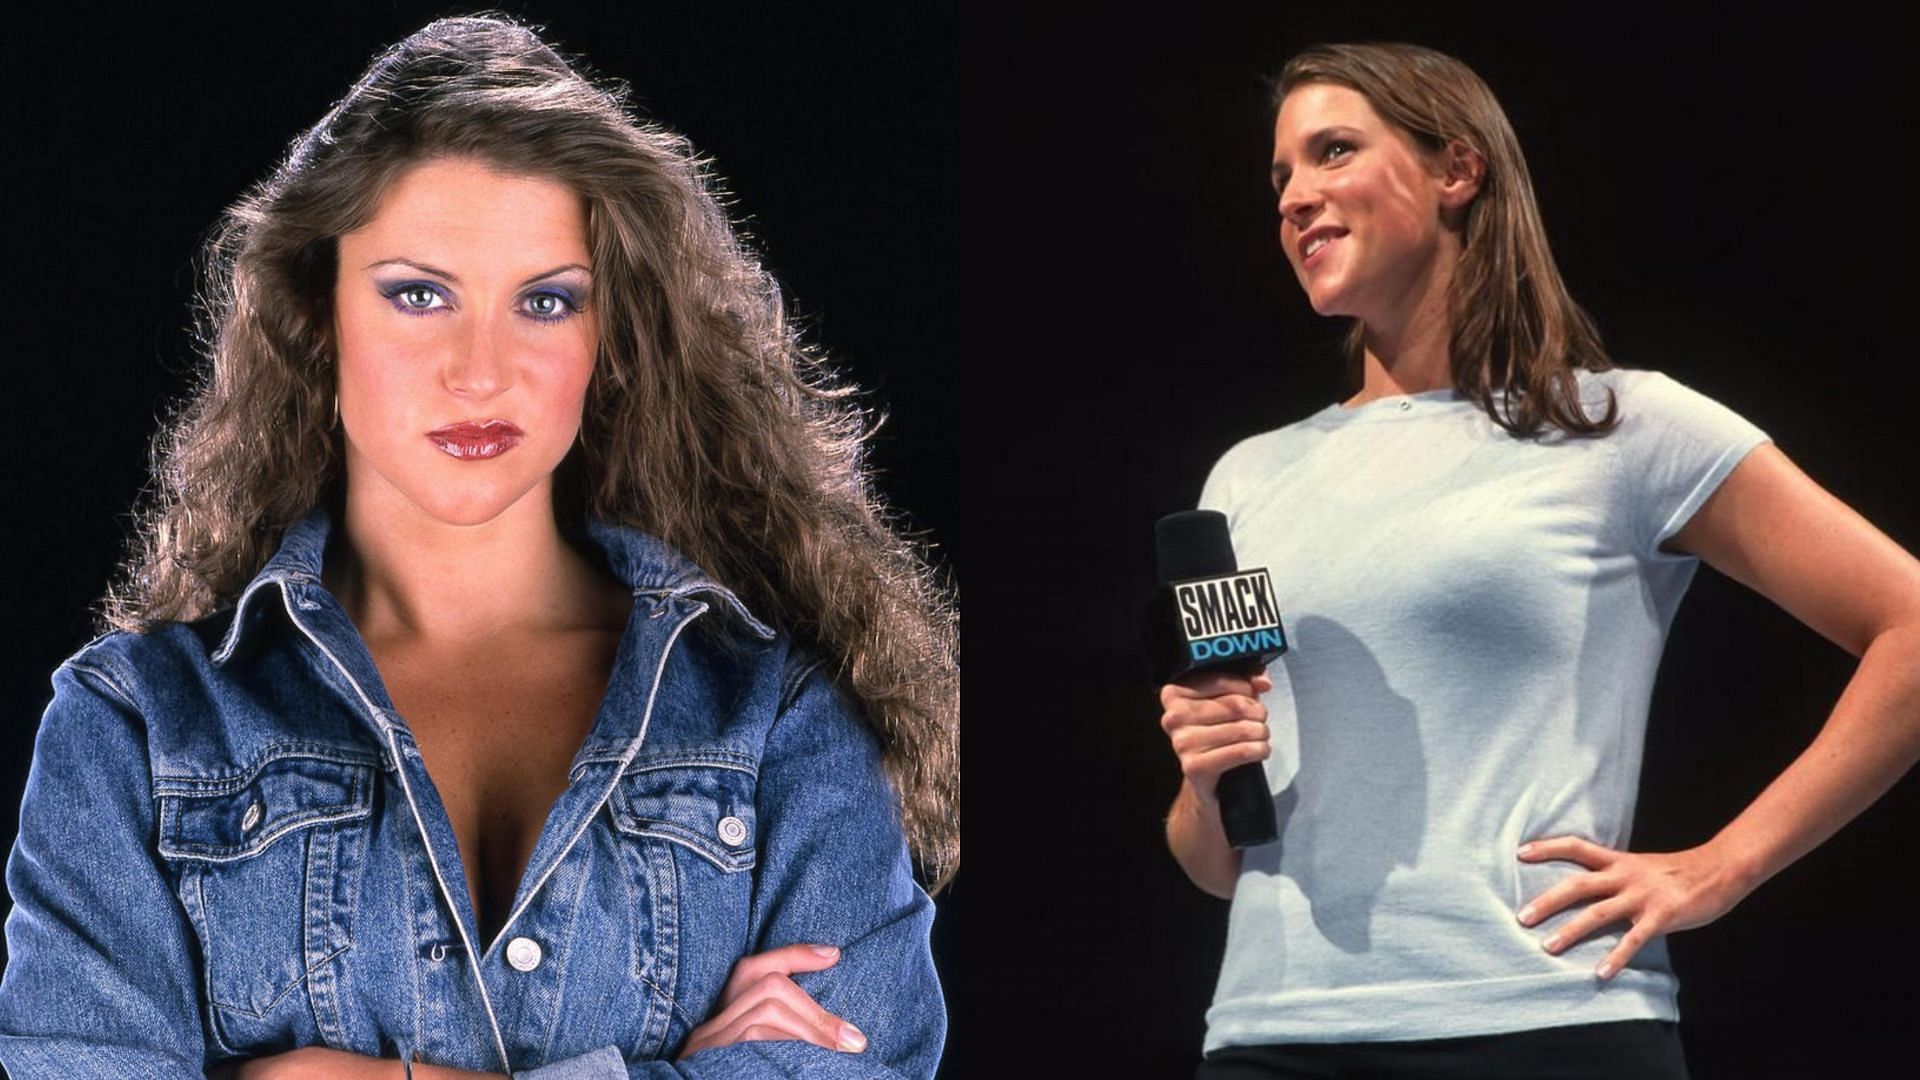 WWE's Stephanie McMahon and Wrestler Triple H's Relationship